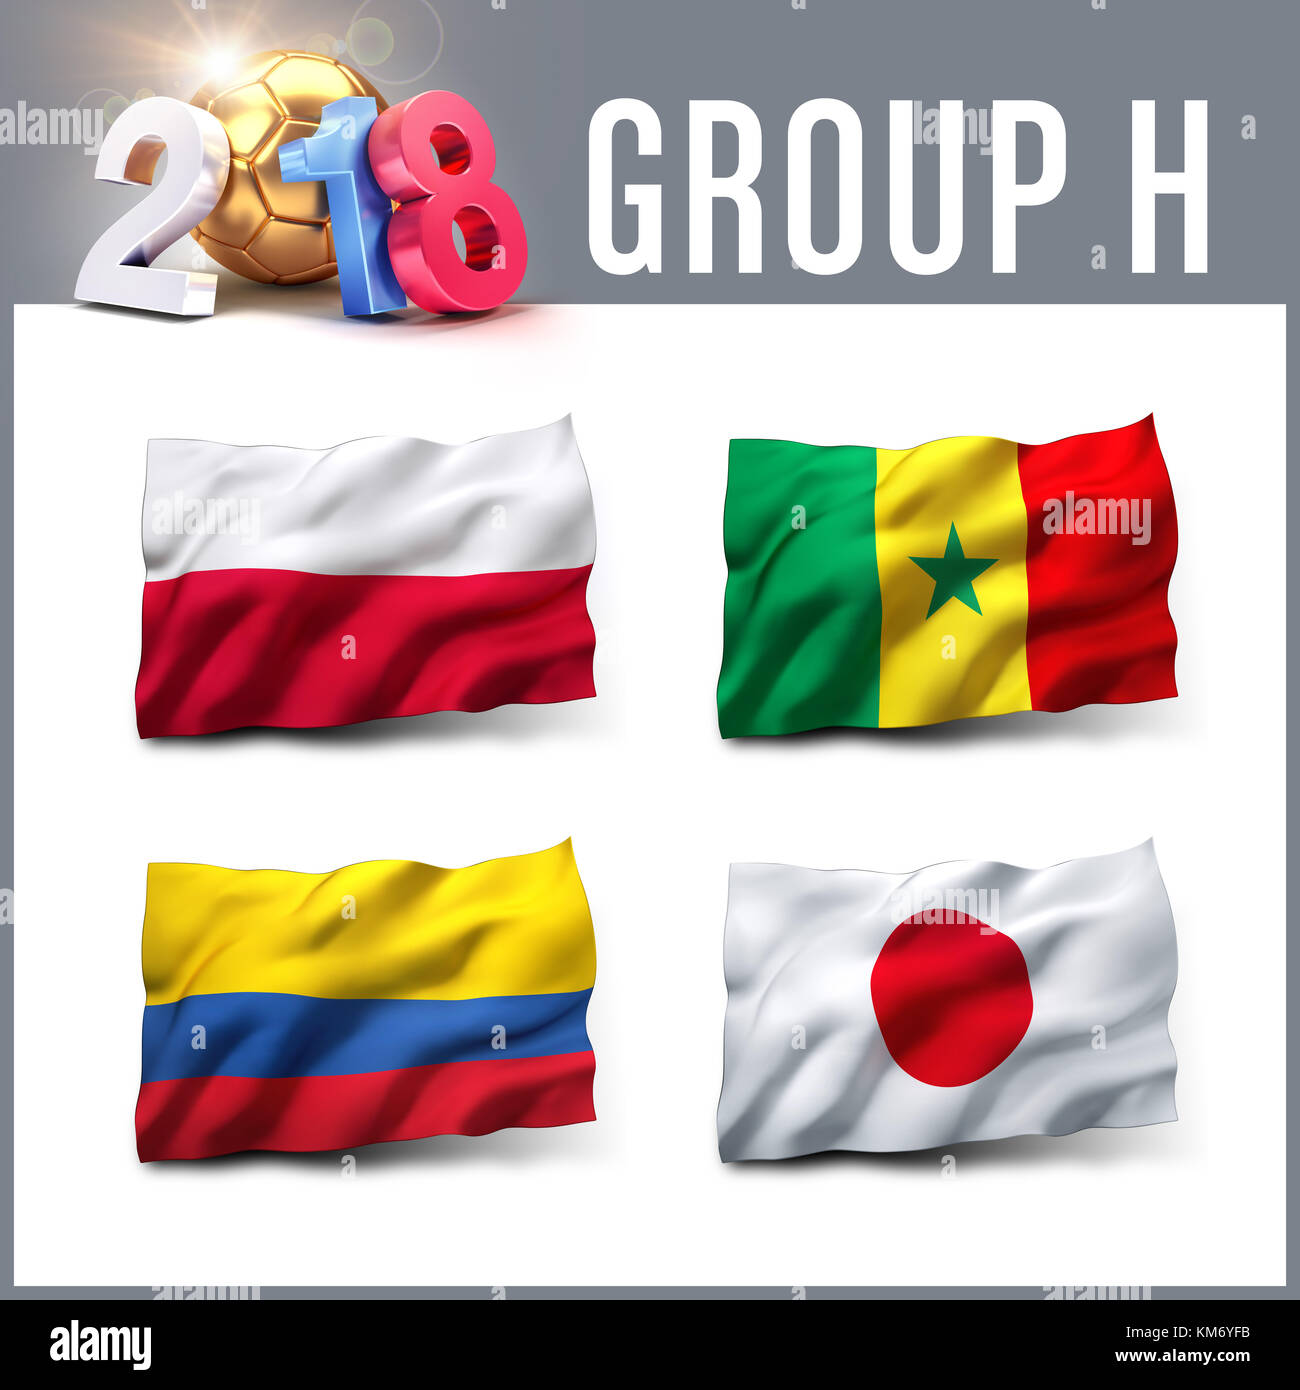 Russia 2018 qualifying group H with team flags. International soccer competition. 3D illustration. Stock Photo